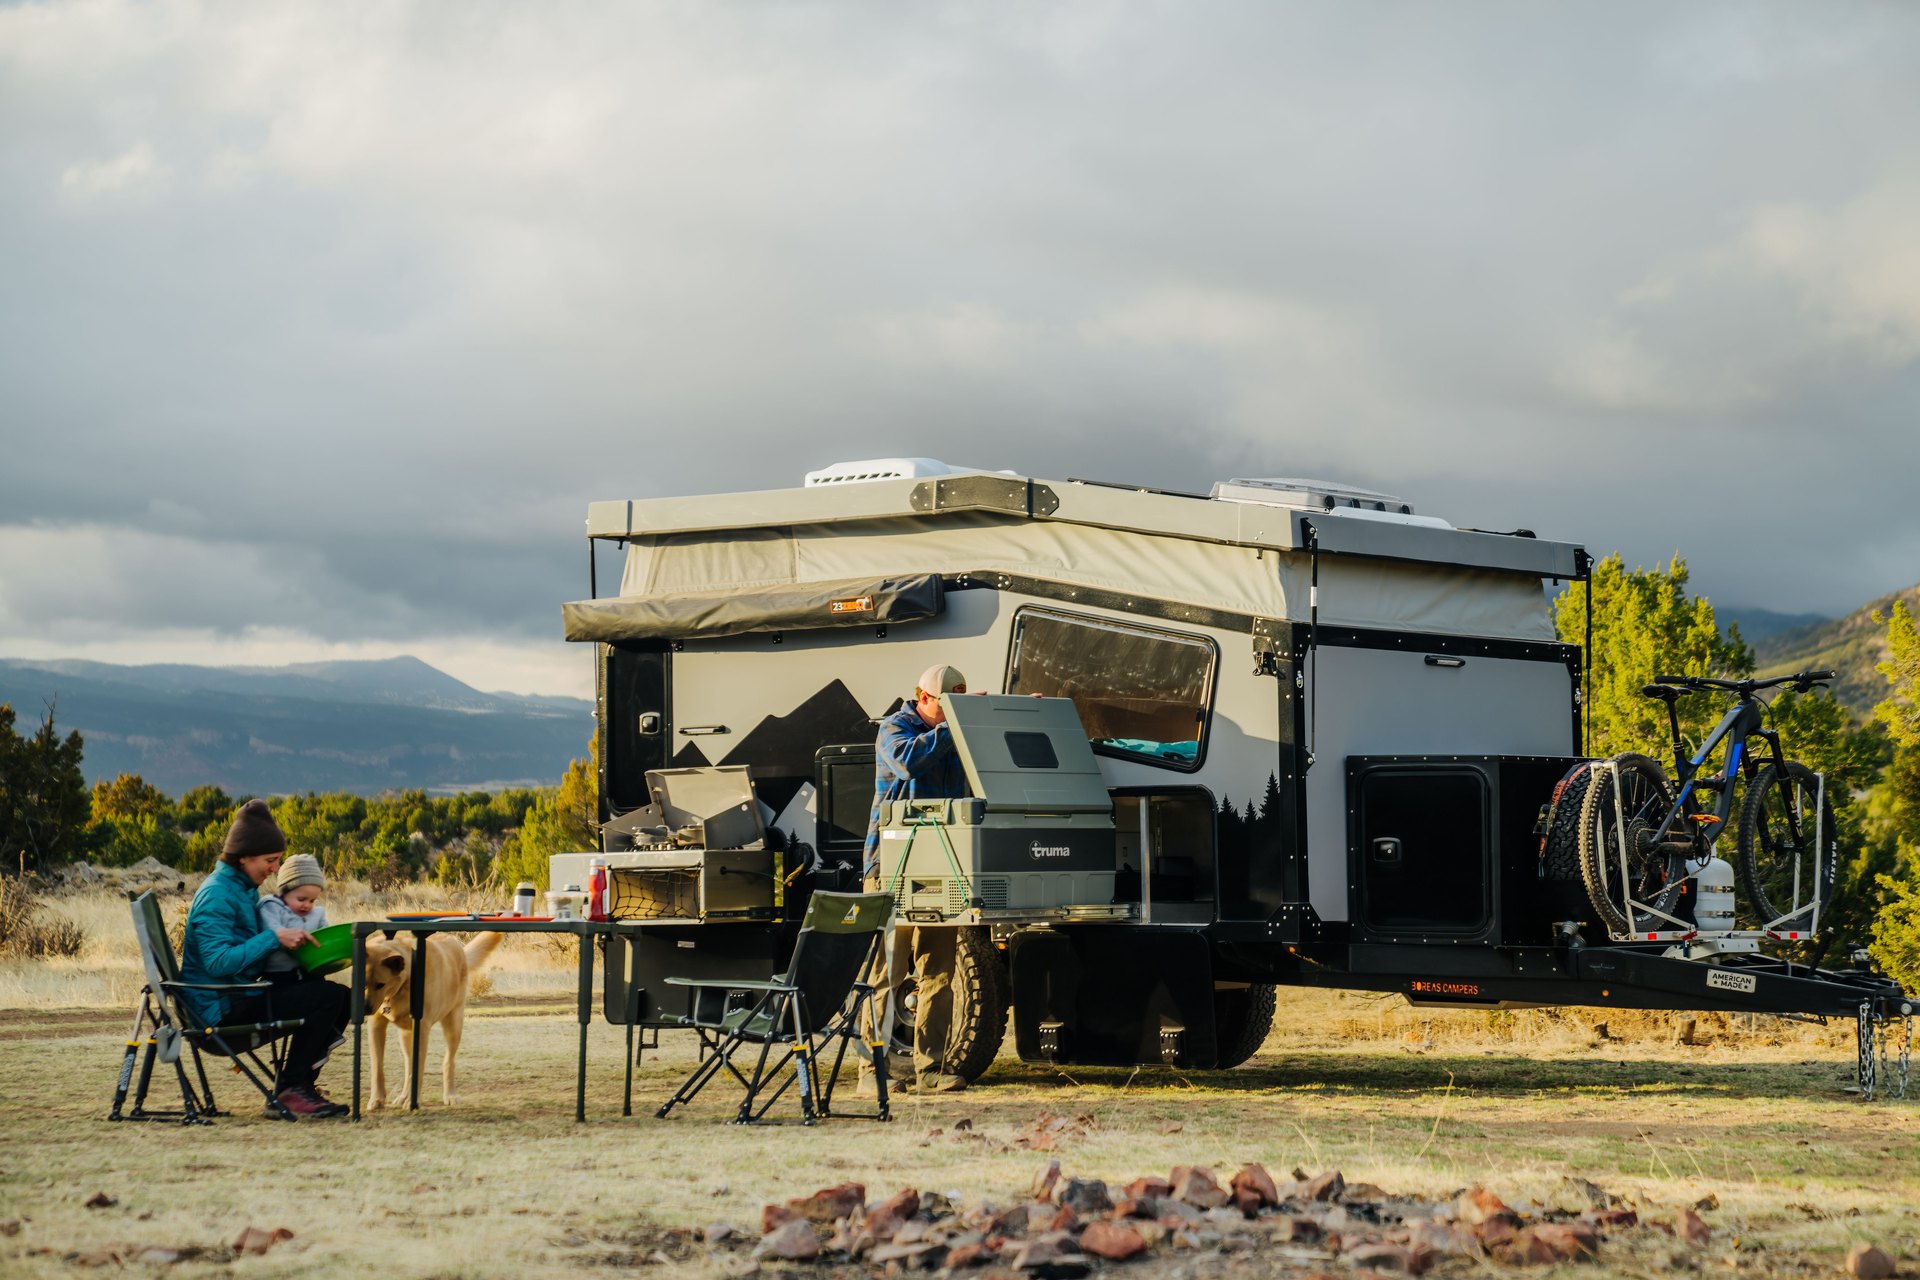 The EOS-12 is the Perfect Offroad, Offgrid Camper Trailer